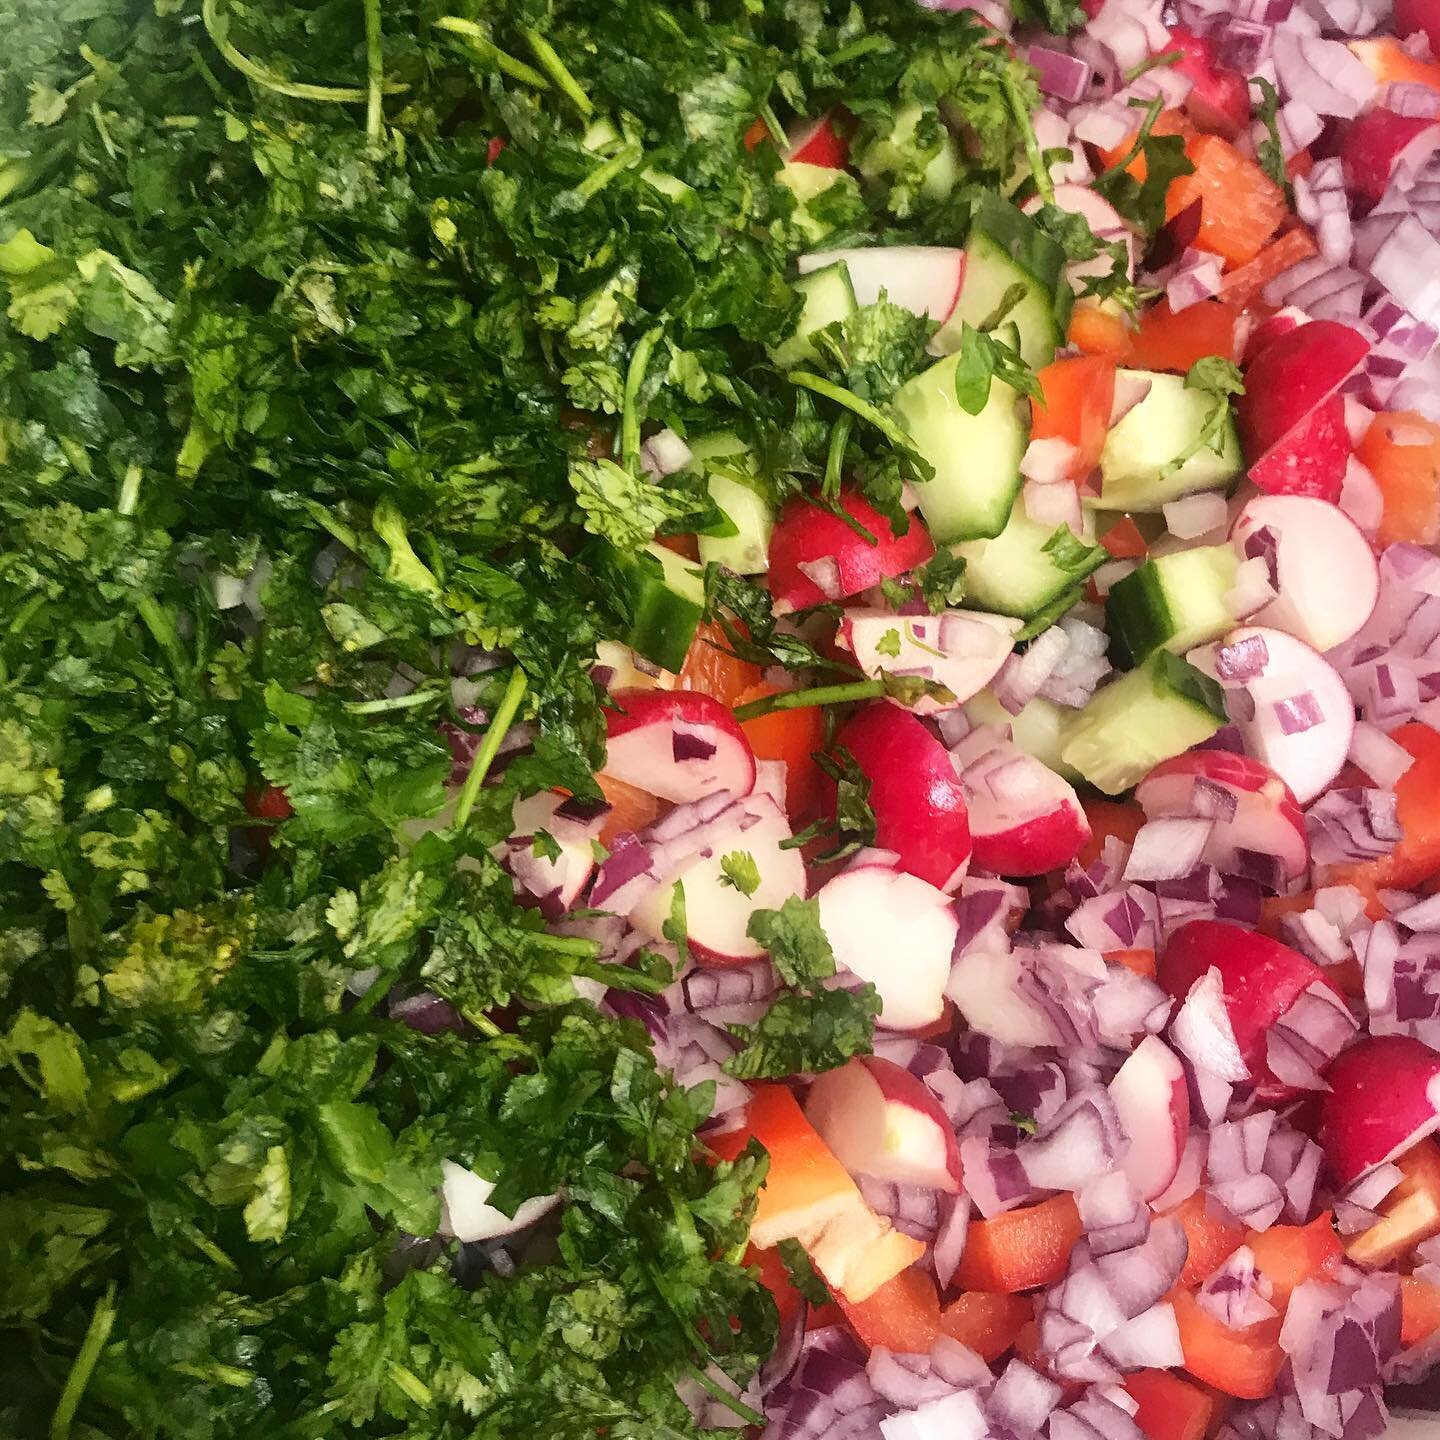 Prepping for my next delicious salad!!! #tomatoes #onions #peppers #coriander #parsley #radish #chickpeasalad #spices#healthyfood #greenwicheats #royalteas